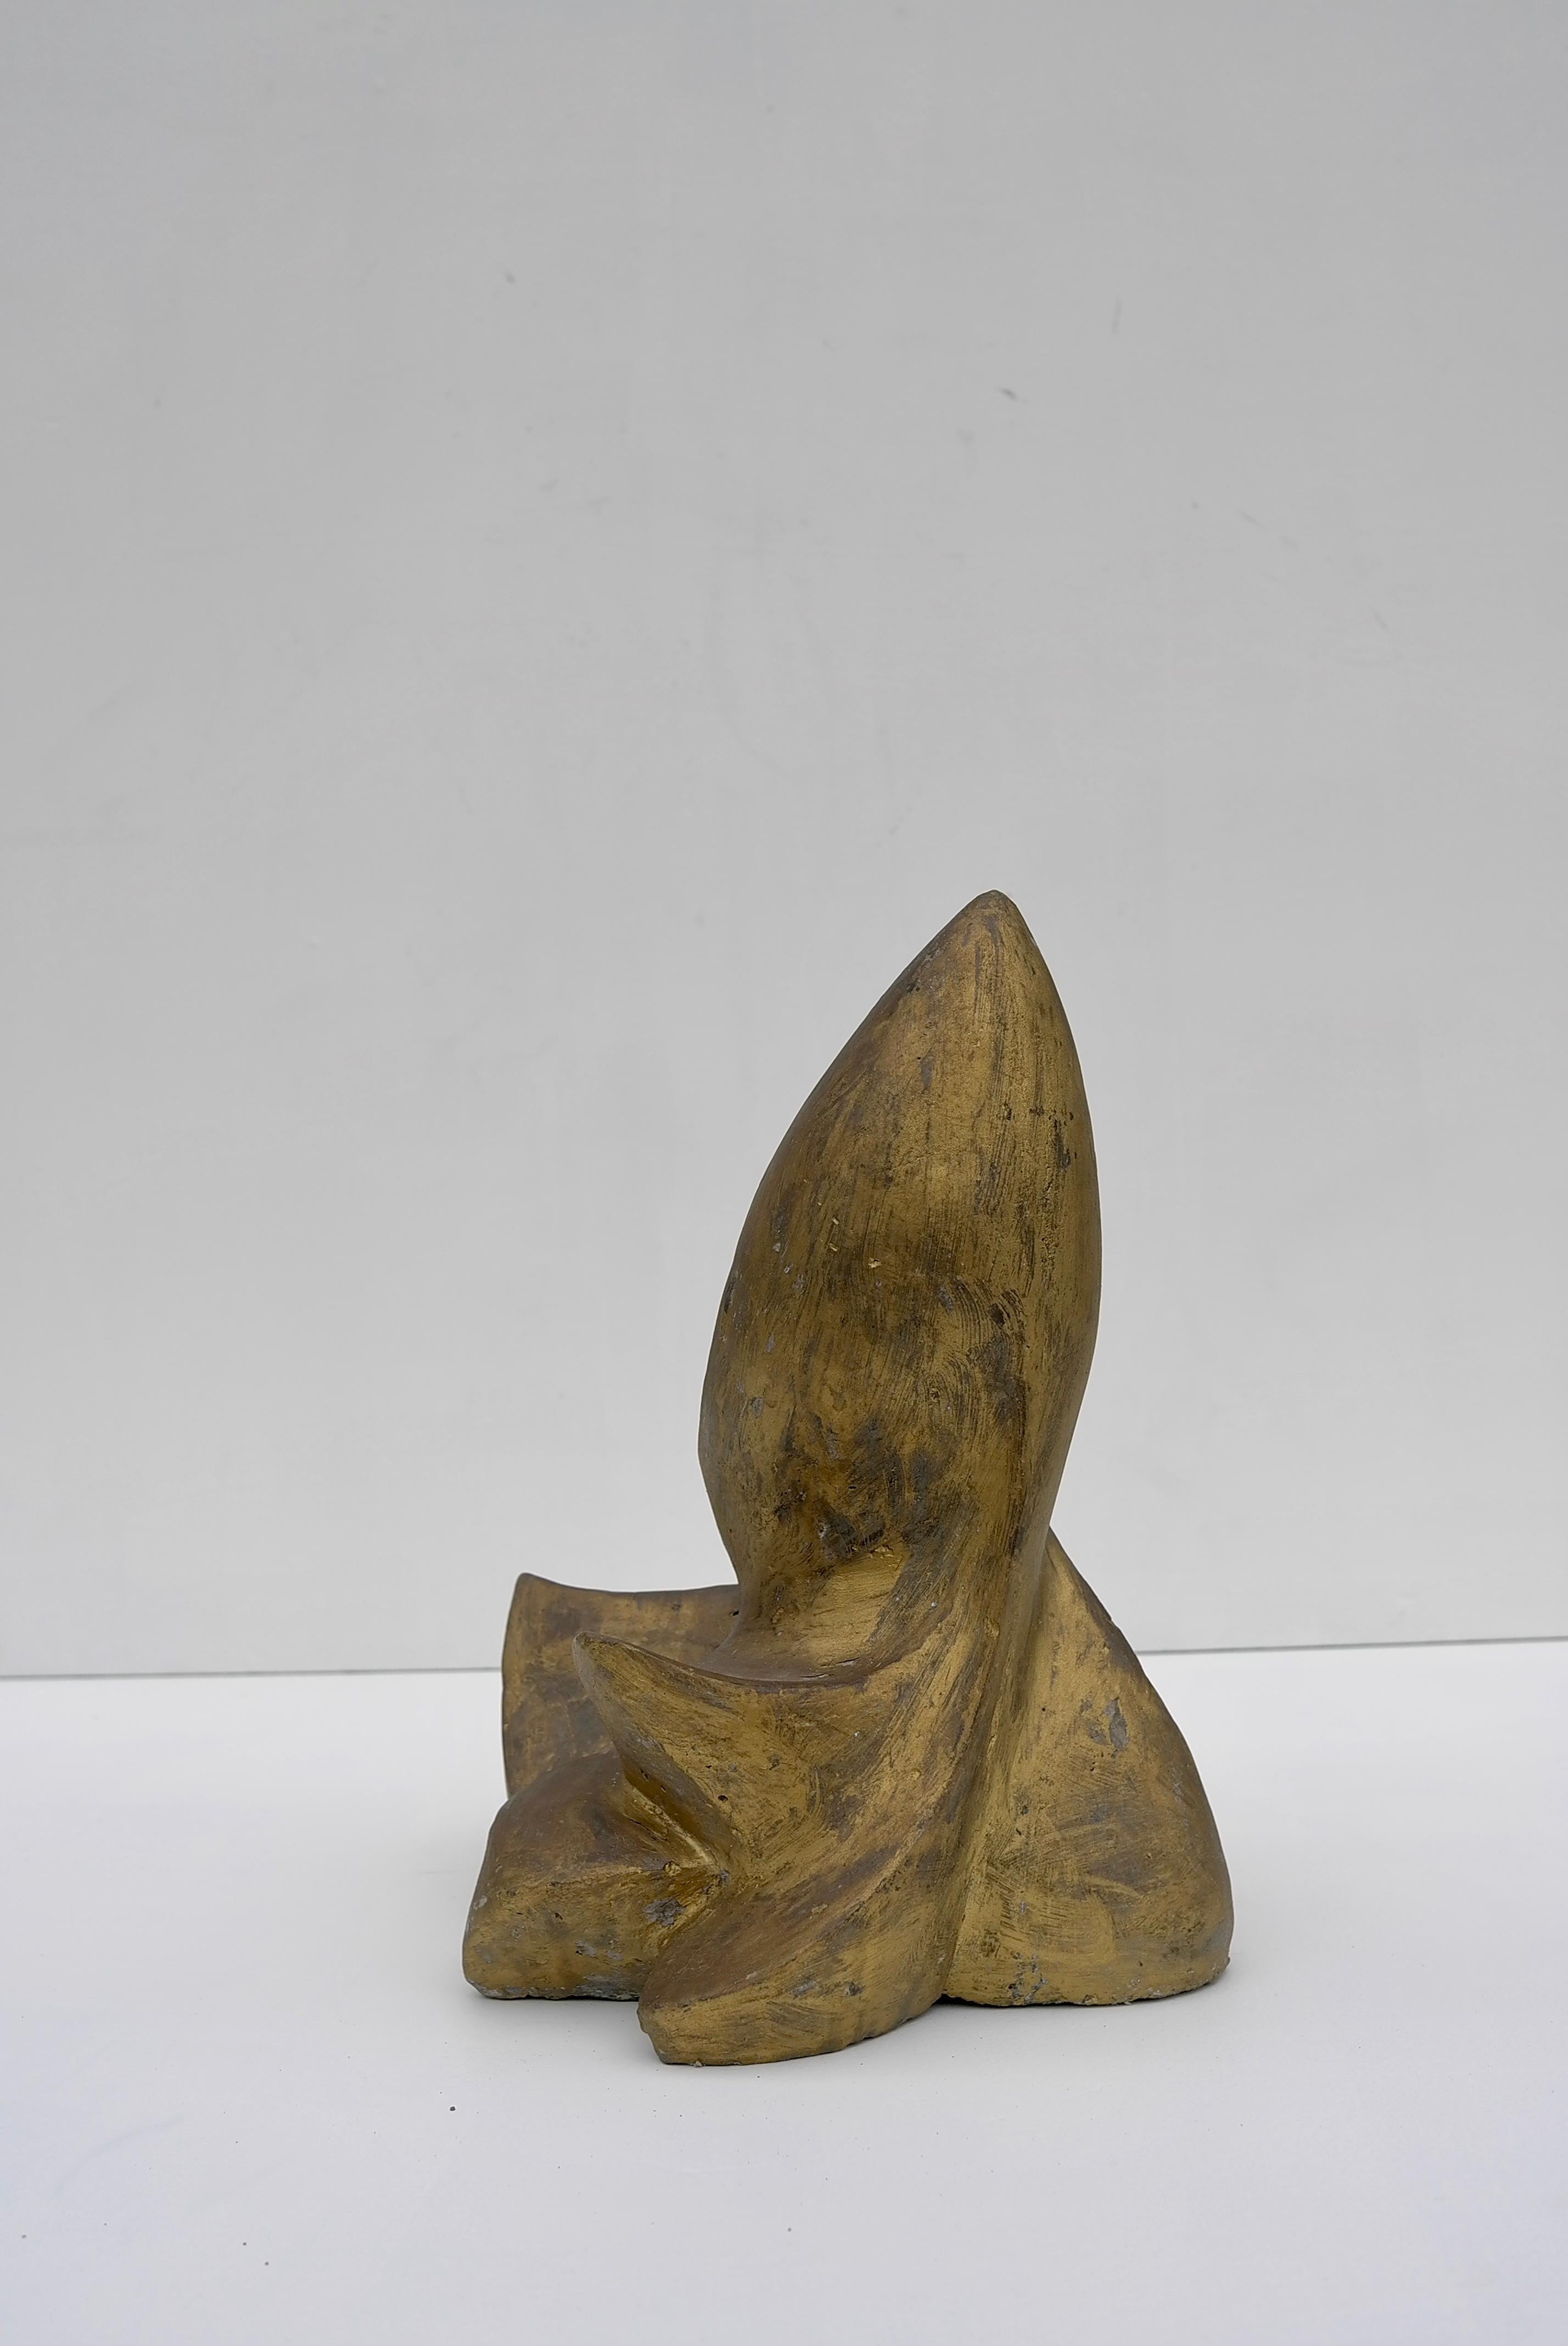 Concrete Mid-Century Modern Abstract Sculpture in Gold Color, Netherlands 1960's For Sale 3